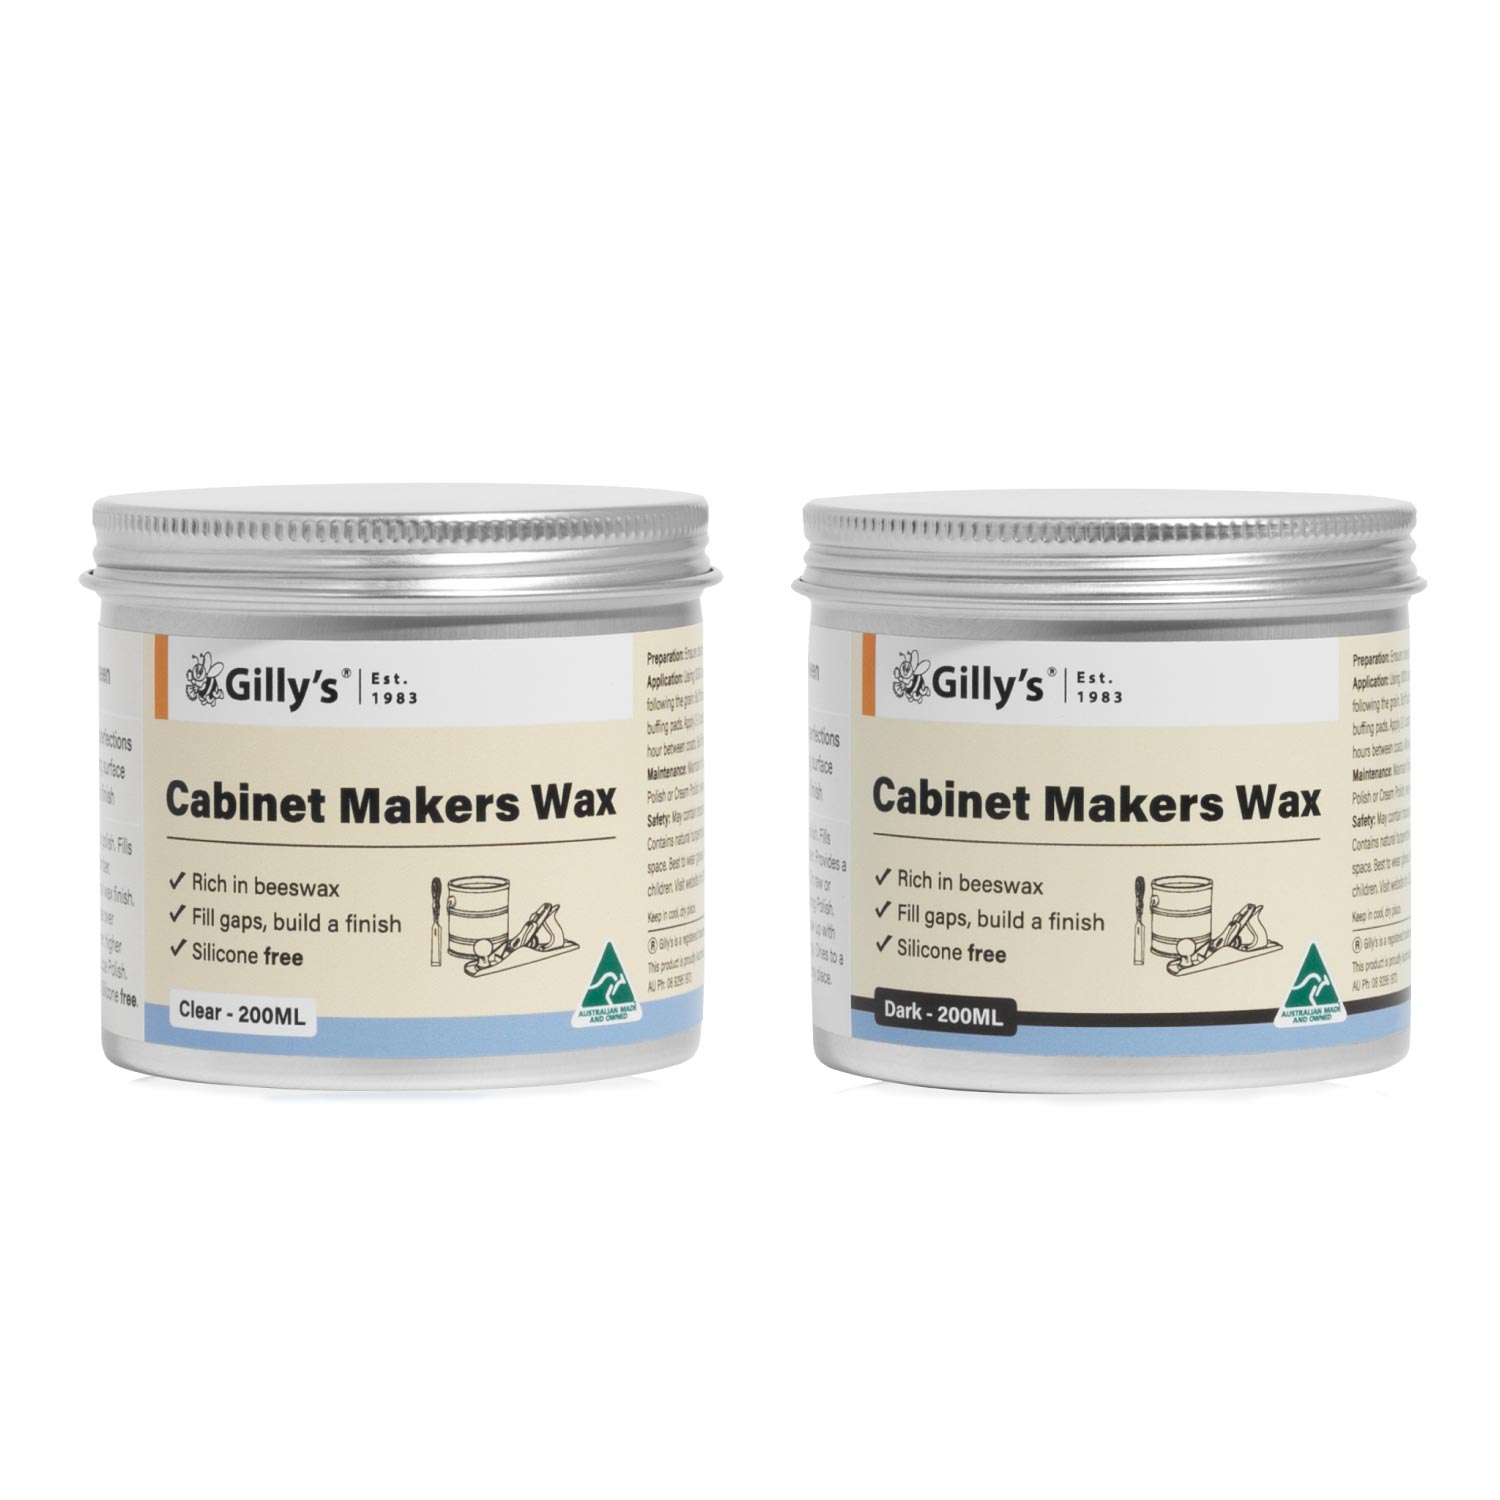 Cabinet Makers Wax by Gilly's